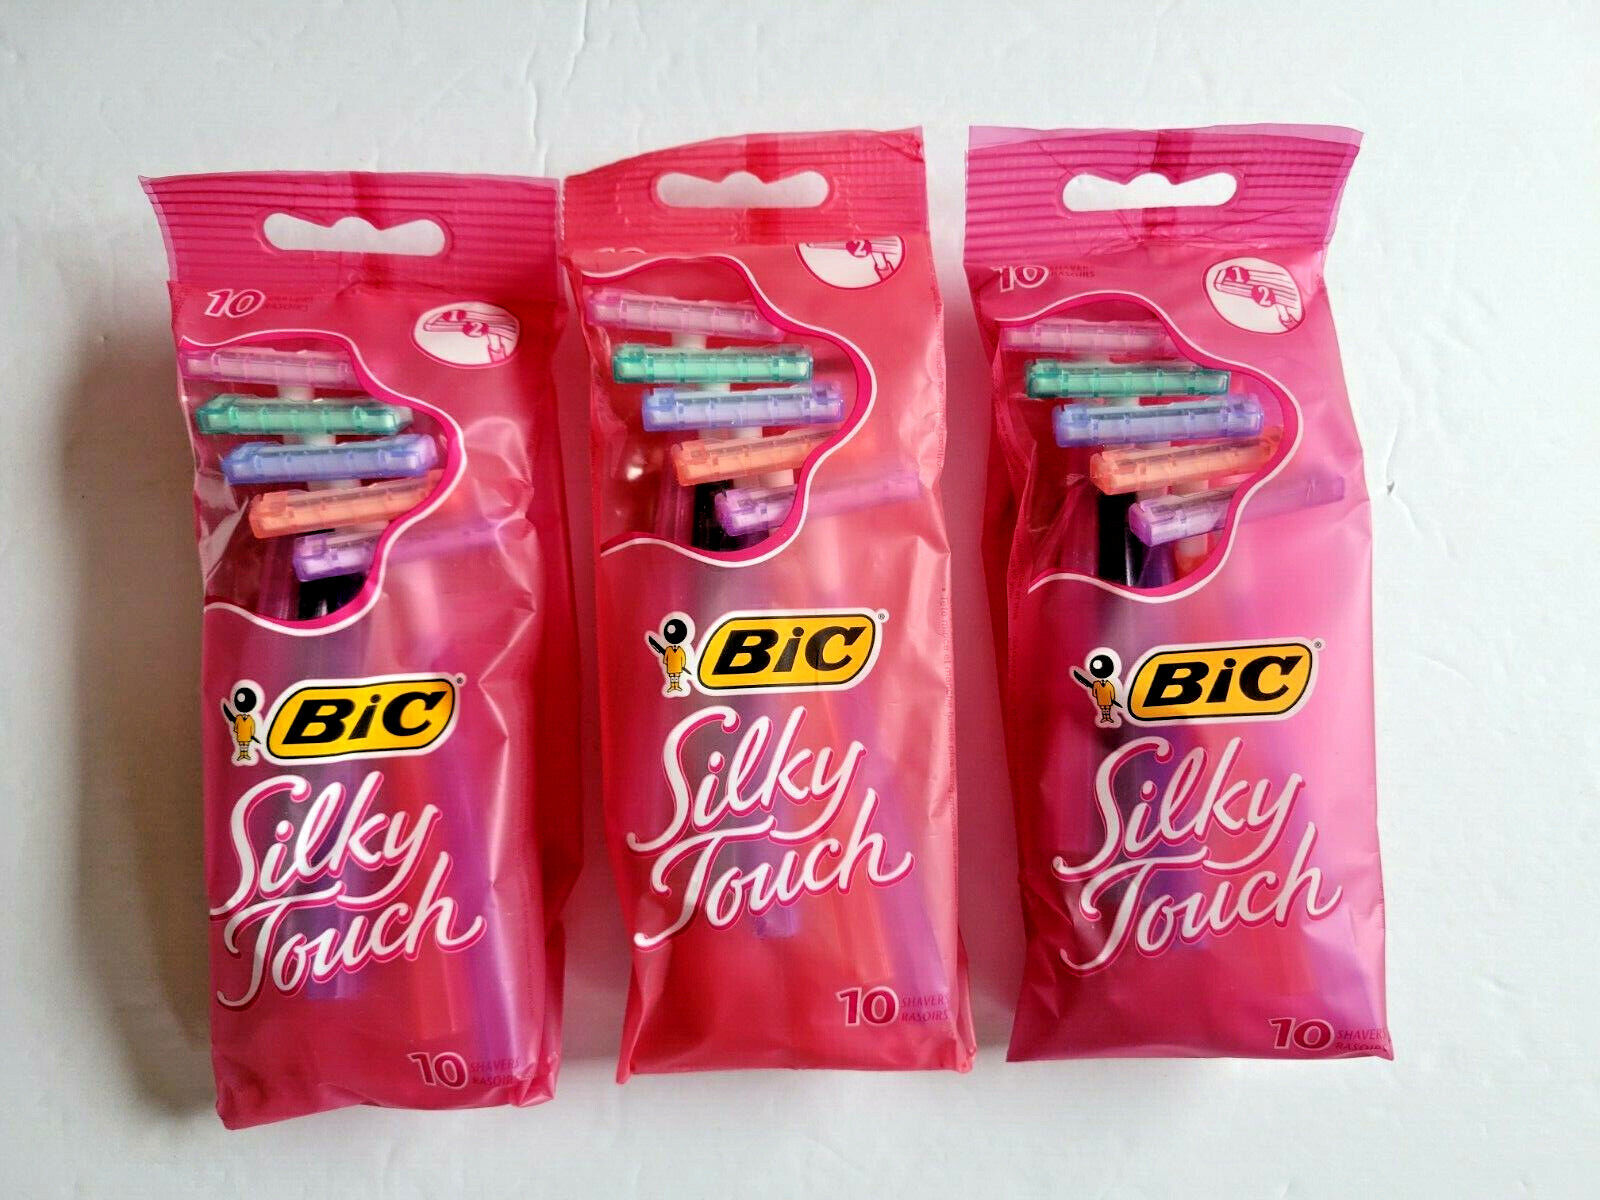 New BIC Silky Touch Razors Disposable, 3 Packs of 10 - Total 30 Razors BIC BIC Twin Lady/Silky Touch